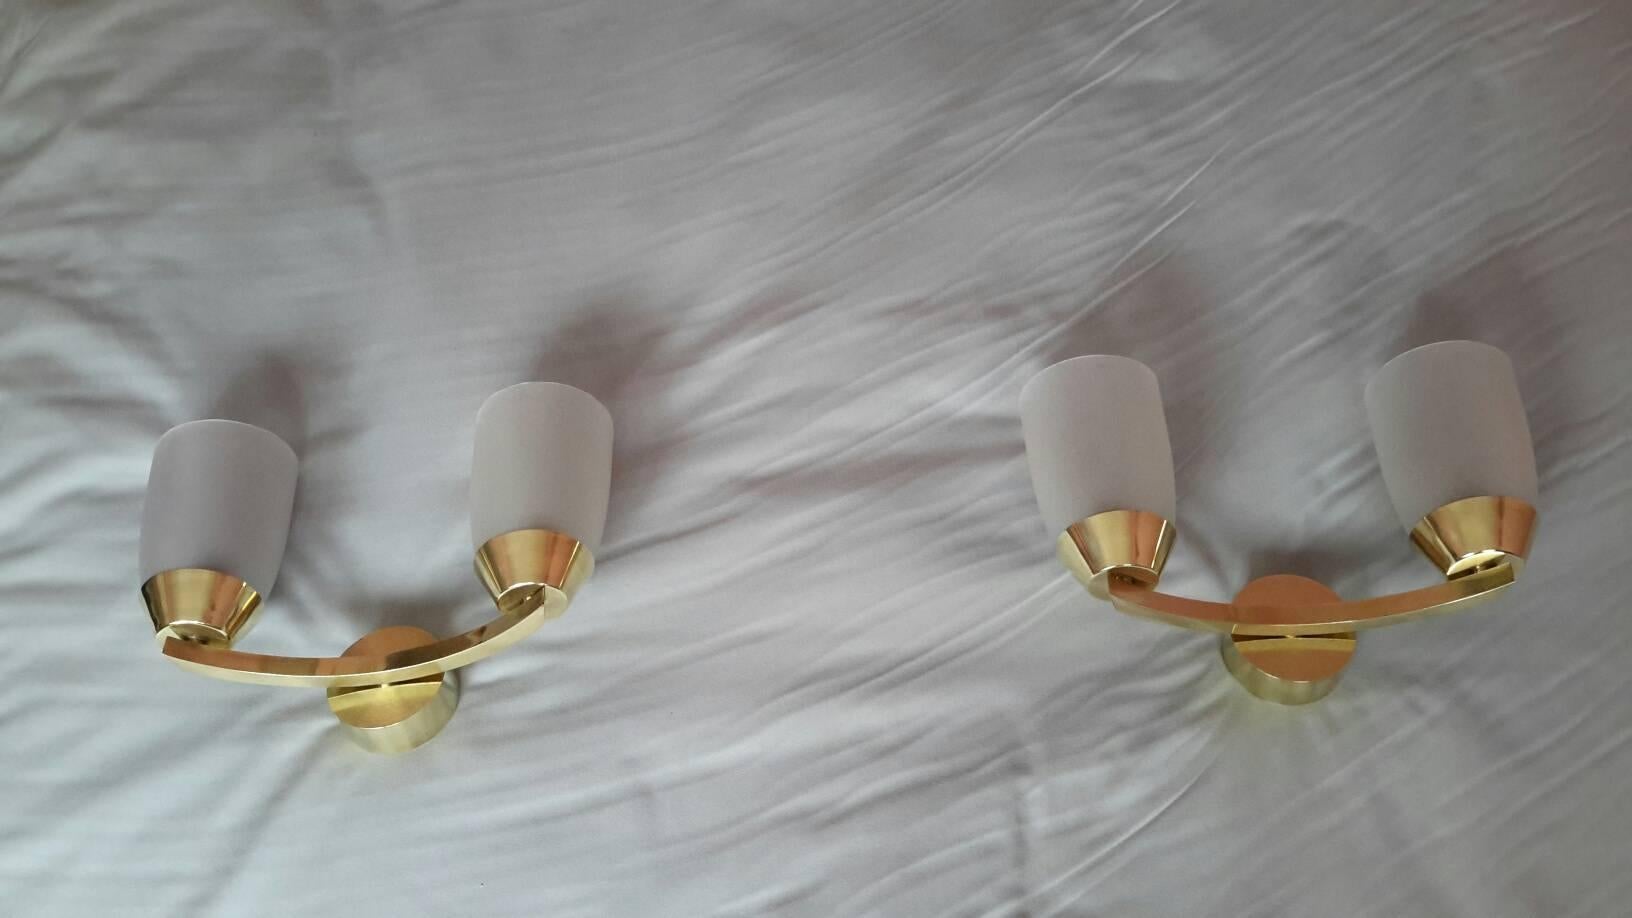 Elegant pair of Modernist double sconces from the mid-1950s in brass with original frosted glass shades in the style of Jean Perzel.
The sconces are in excellent condition, rewired and comply with the US Standard (bayonet bulb, 60 watts maxi per